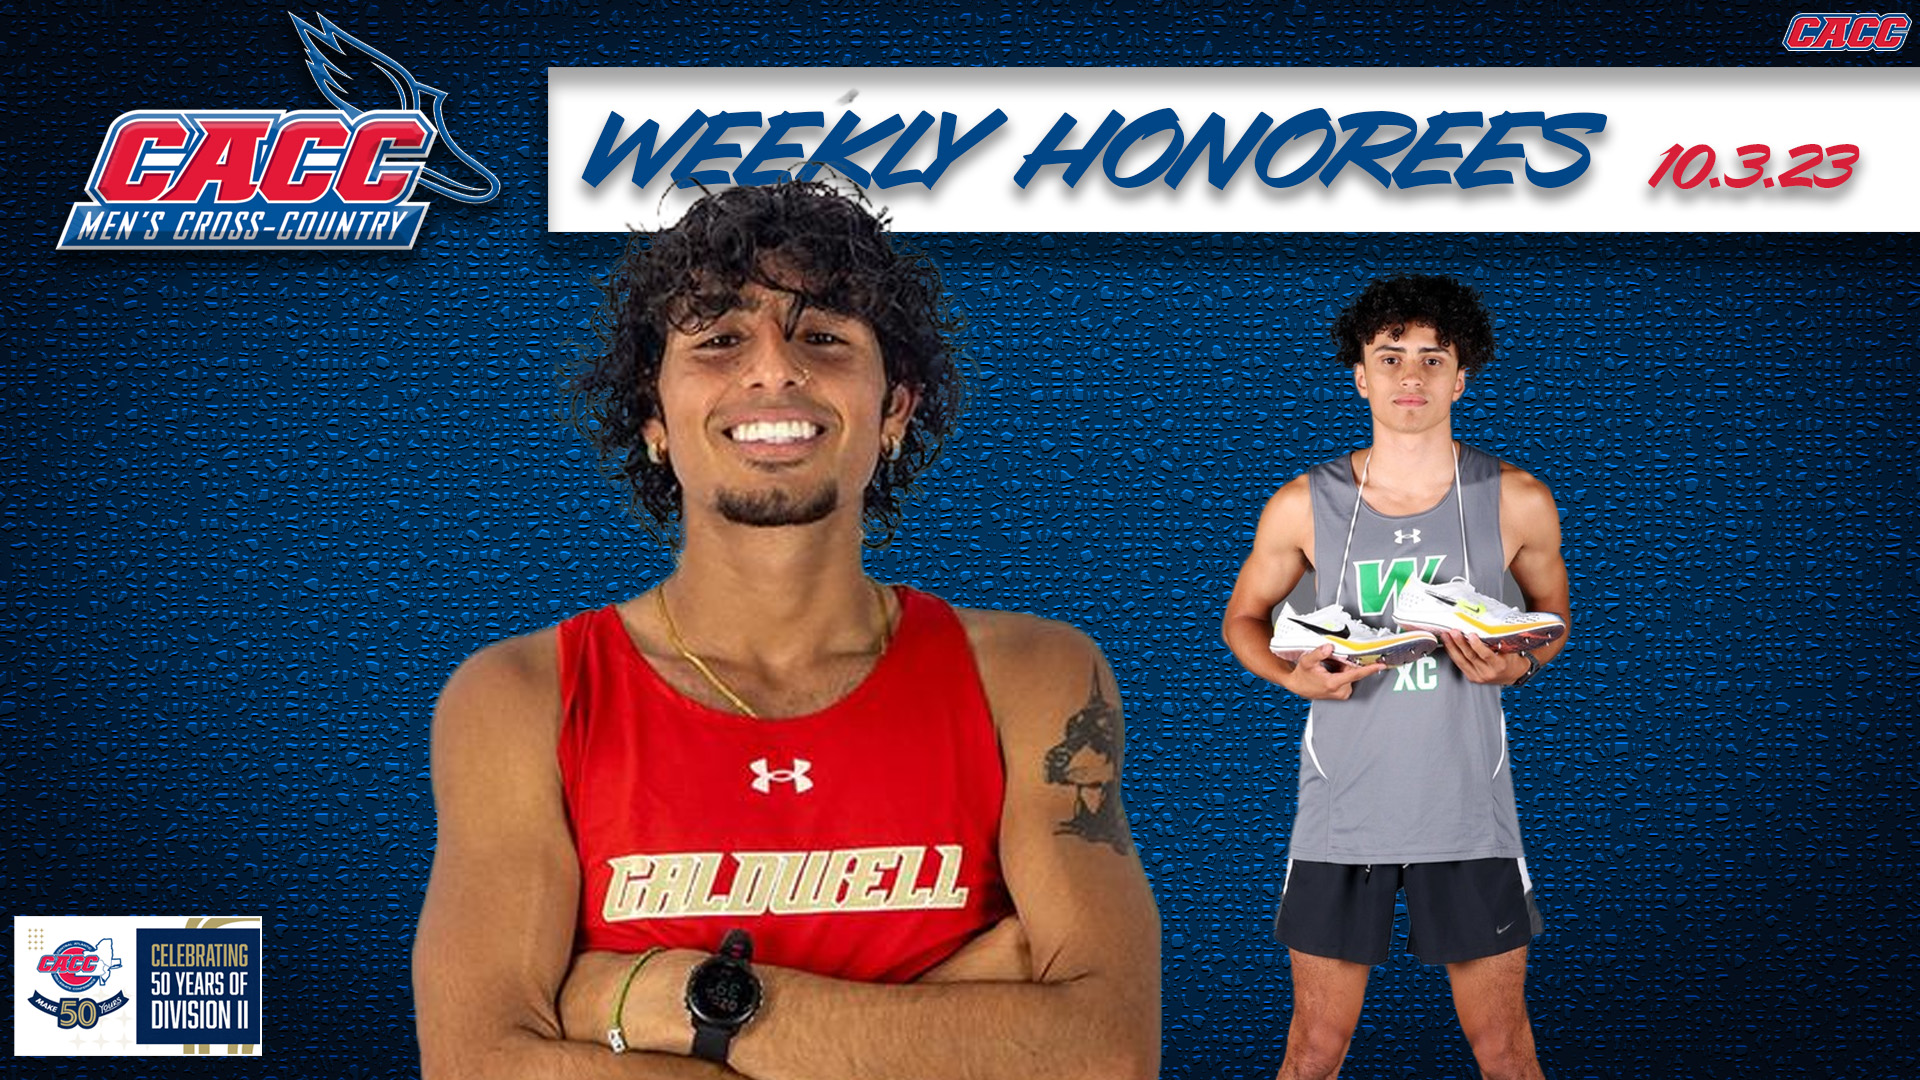 CACC Men's Cross Country Weekly Honorees (10-3-23)